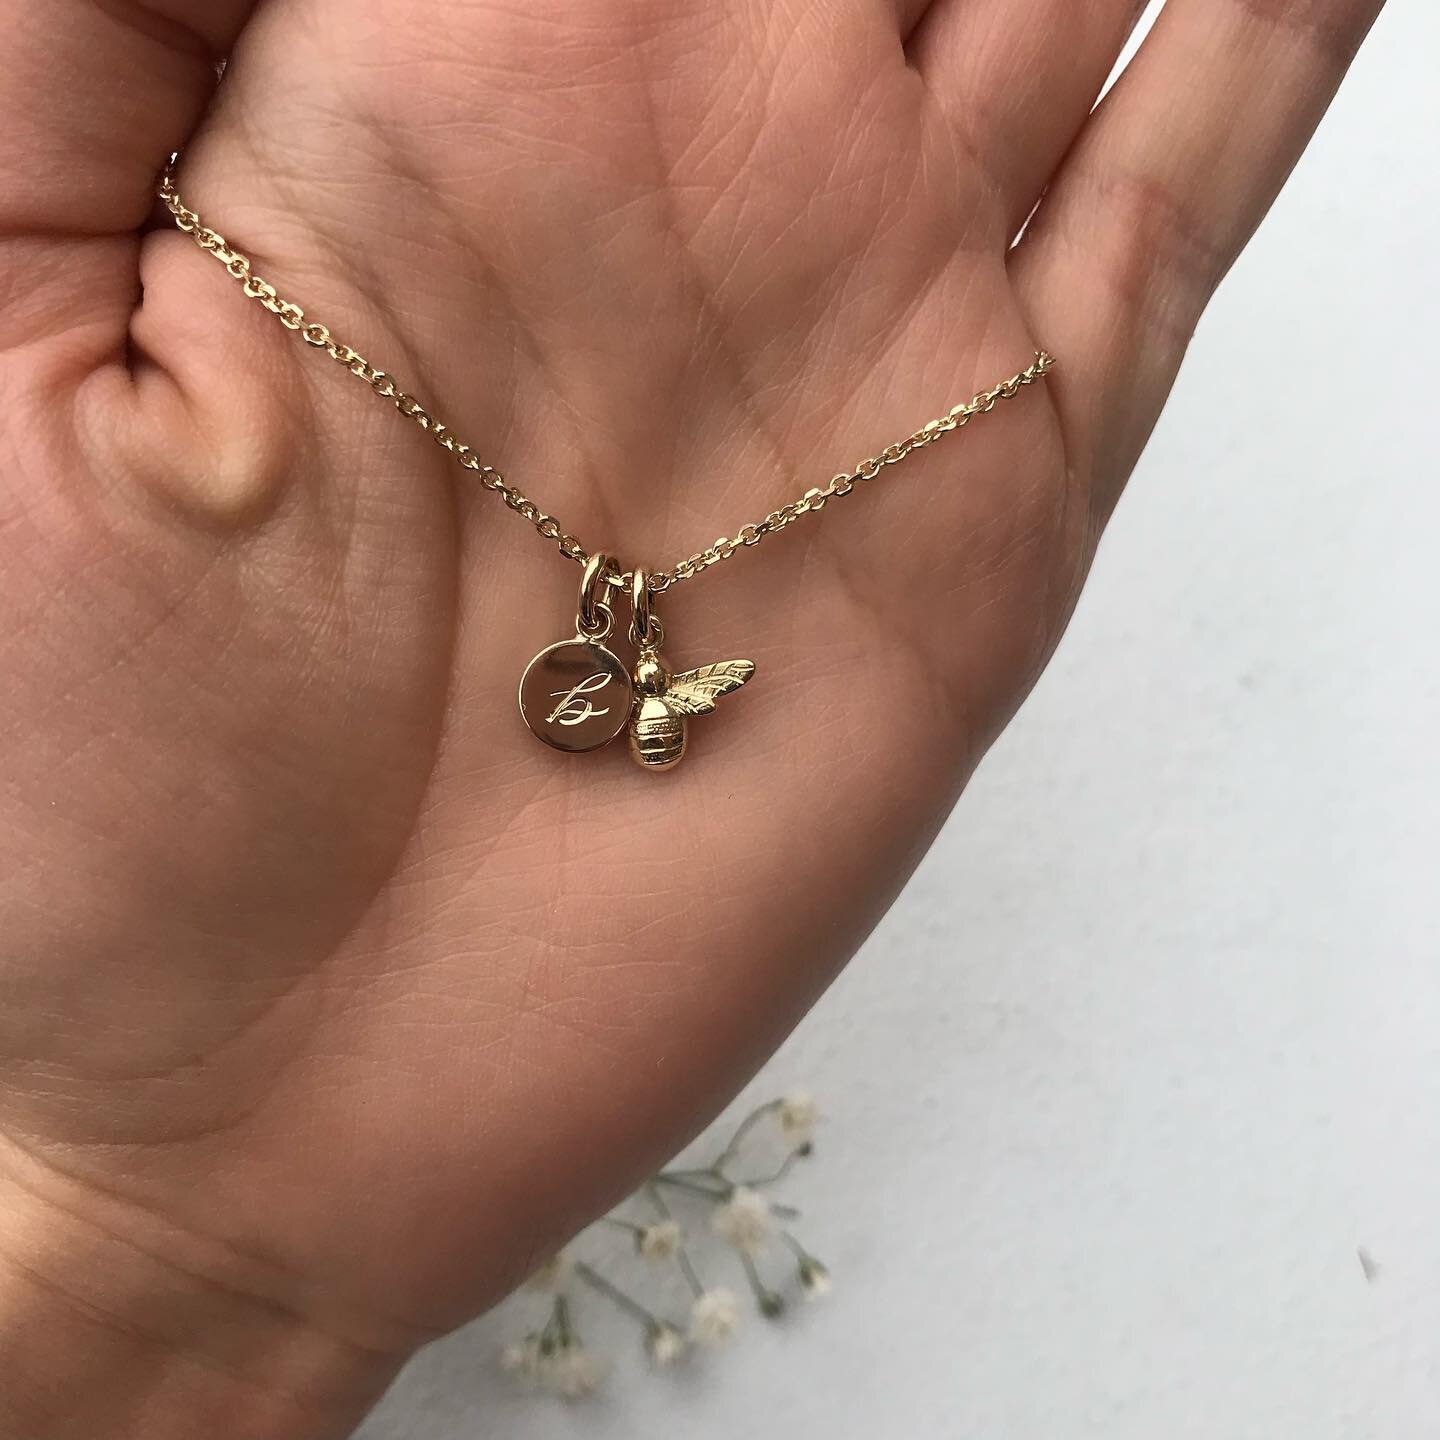 I&rsquo;m in the process of making some more of my little gold 🐝⁣
⁣
They look lovely on their own or paired with charms, like this hand engraved initial ✨ I&rsquo;ve just ordered some gold to make myself a little something to celebrate Pops being bo